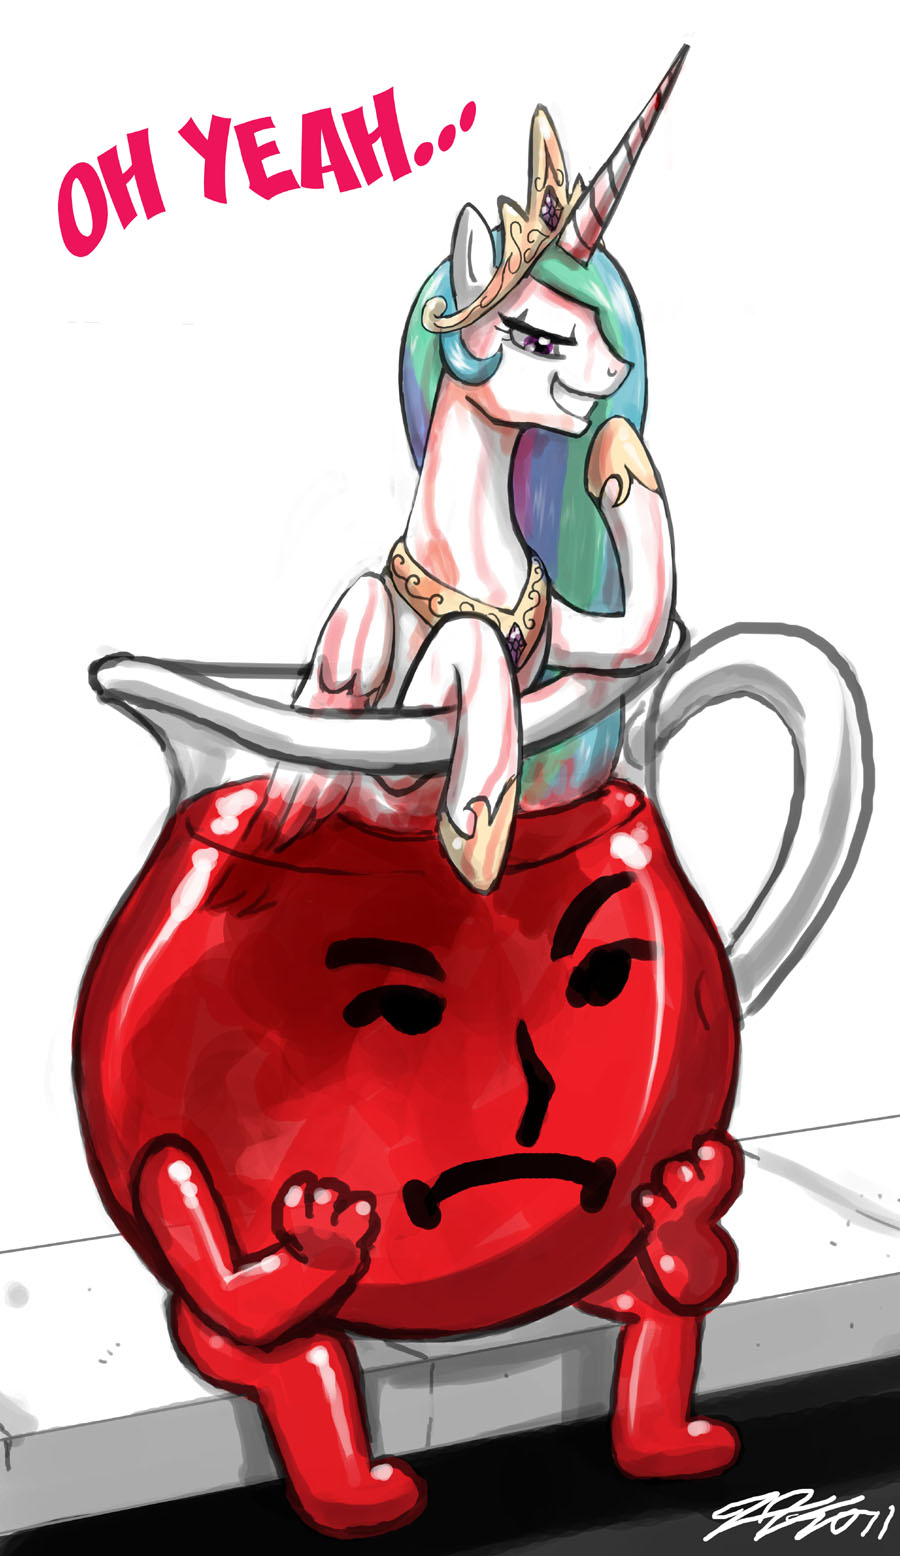 Drink Your Kool-Aid by johnjoseco